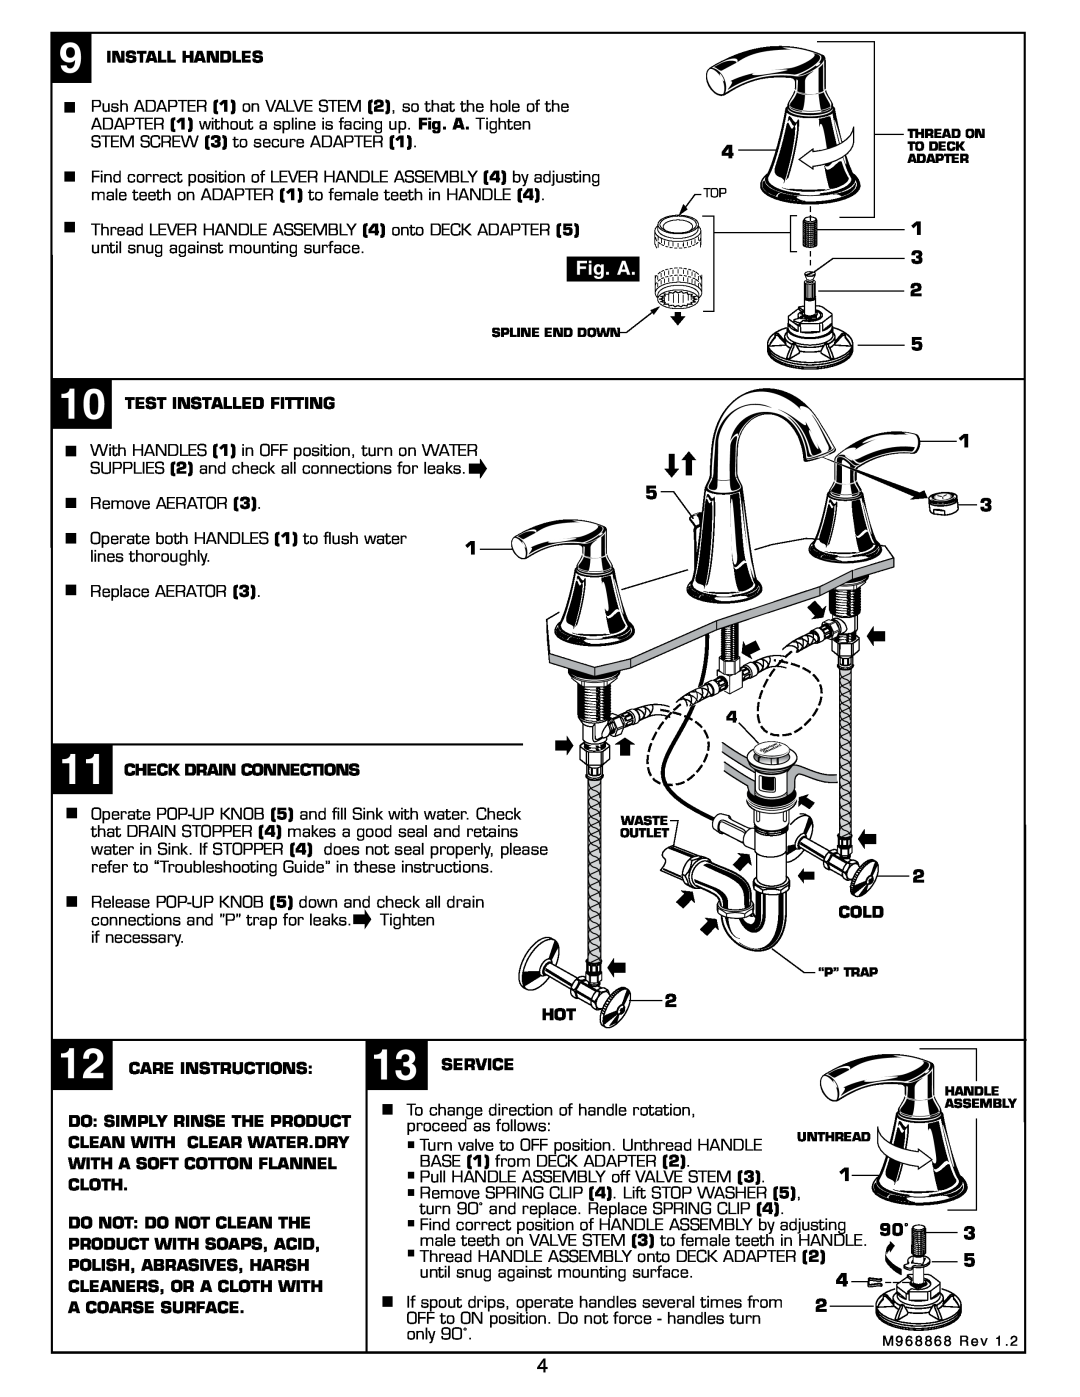 American Standard 7038 installation instructions Fig. A 